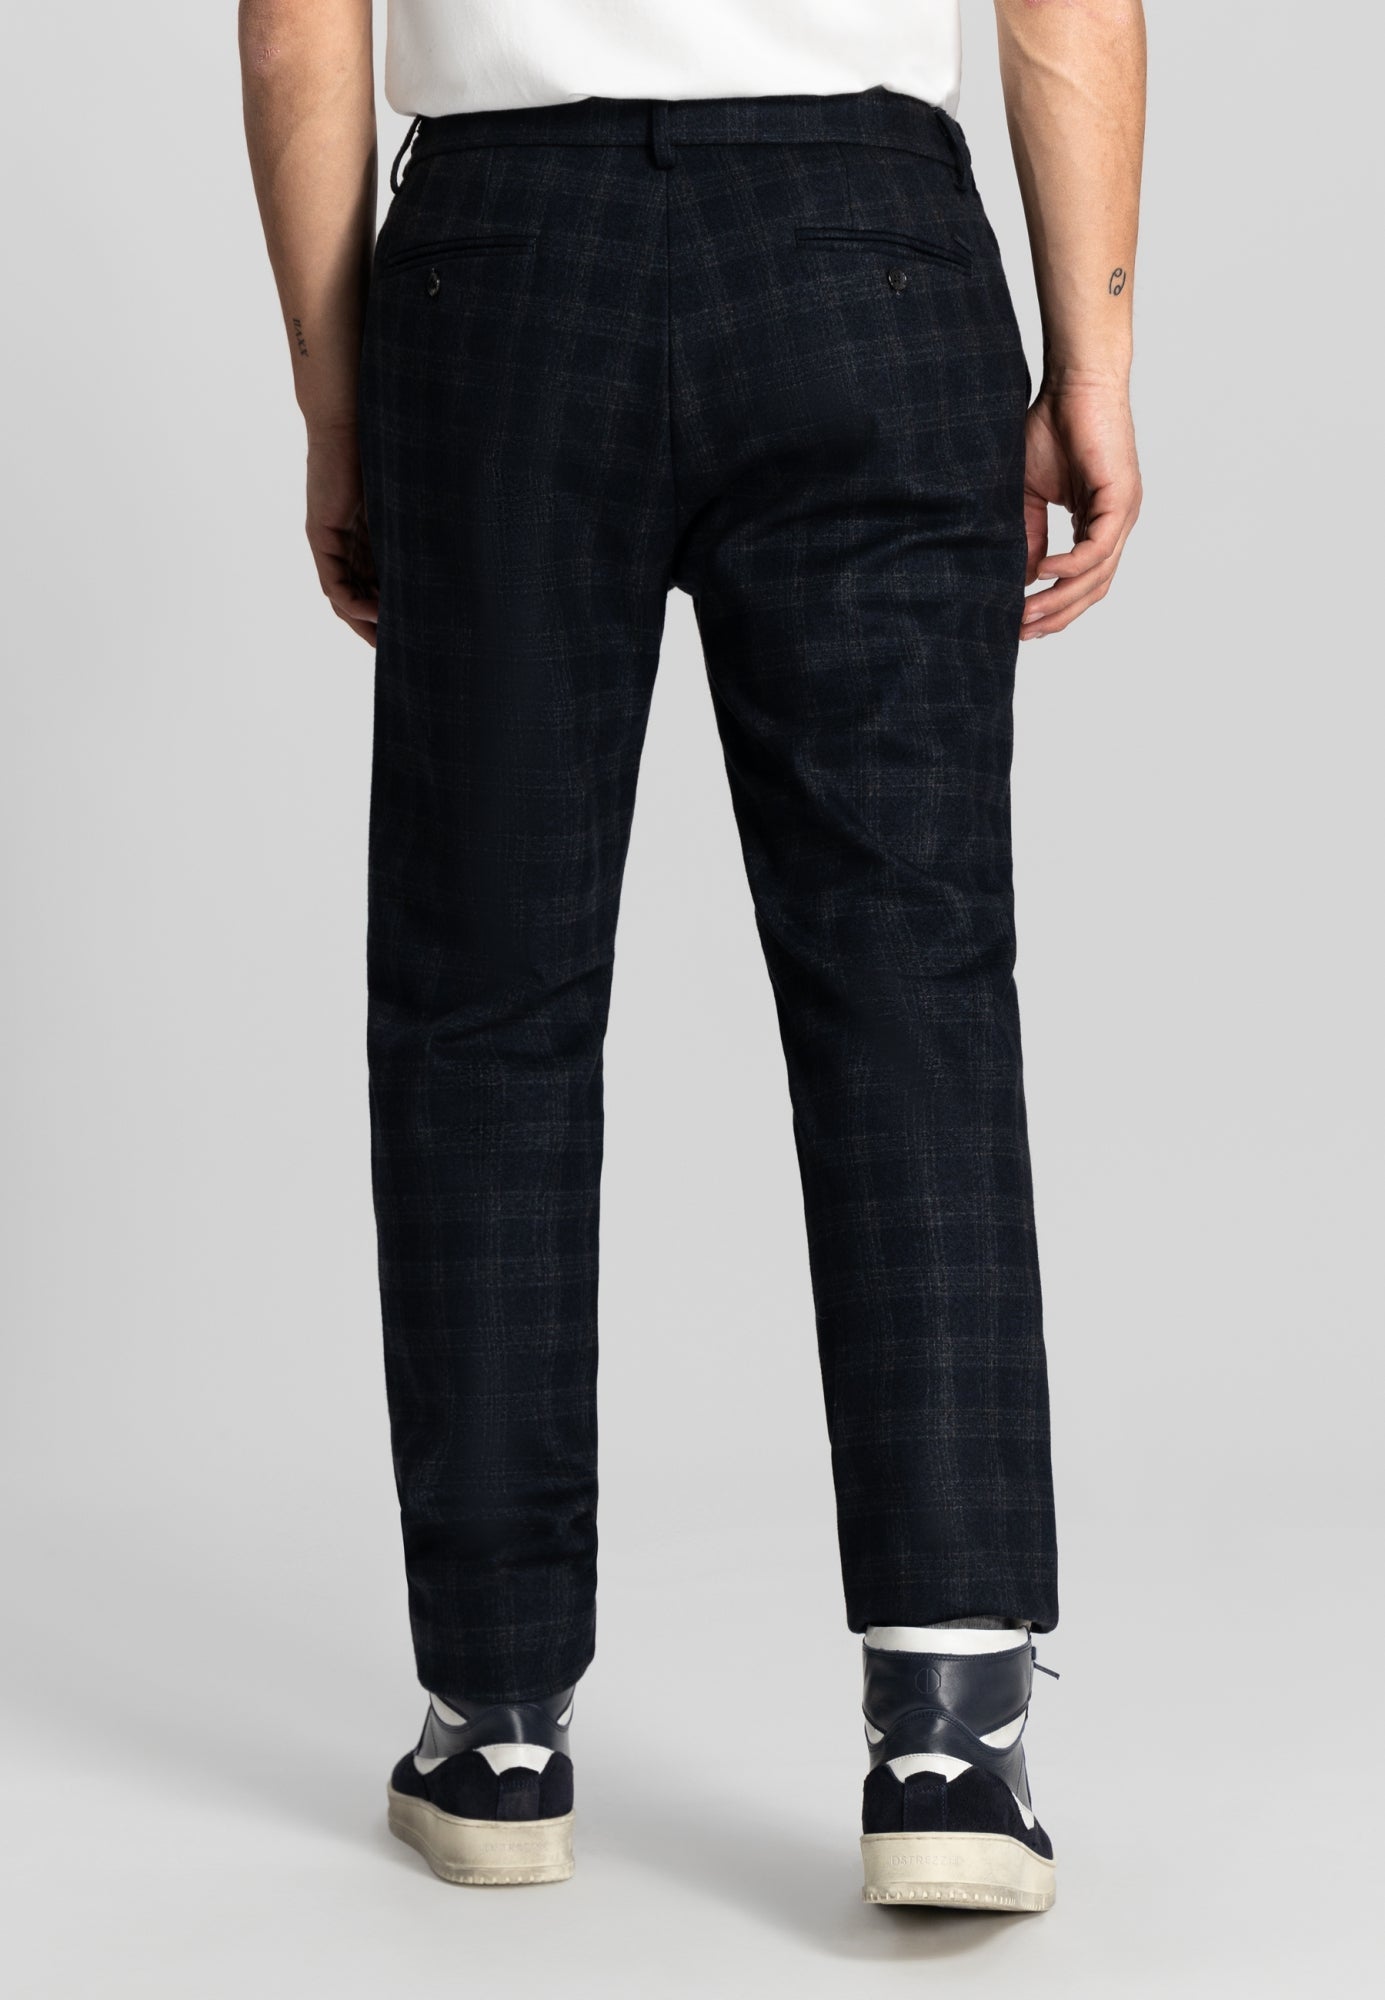 Dstrezzed - Lancaster Tapered Jogger Check Chino - Blue Nights